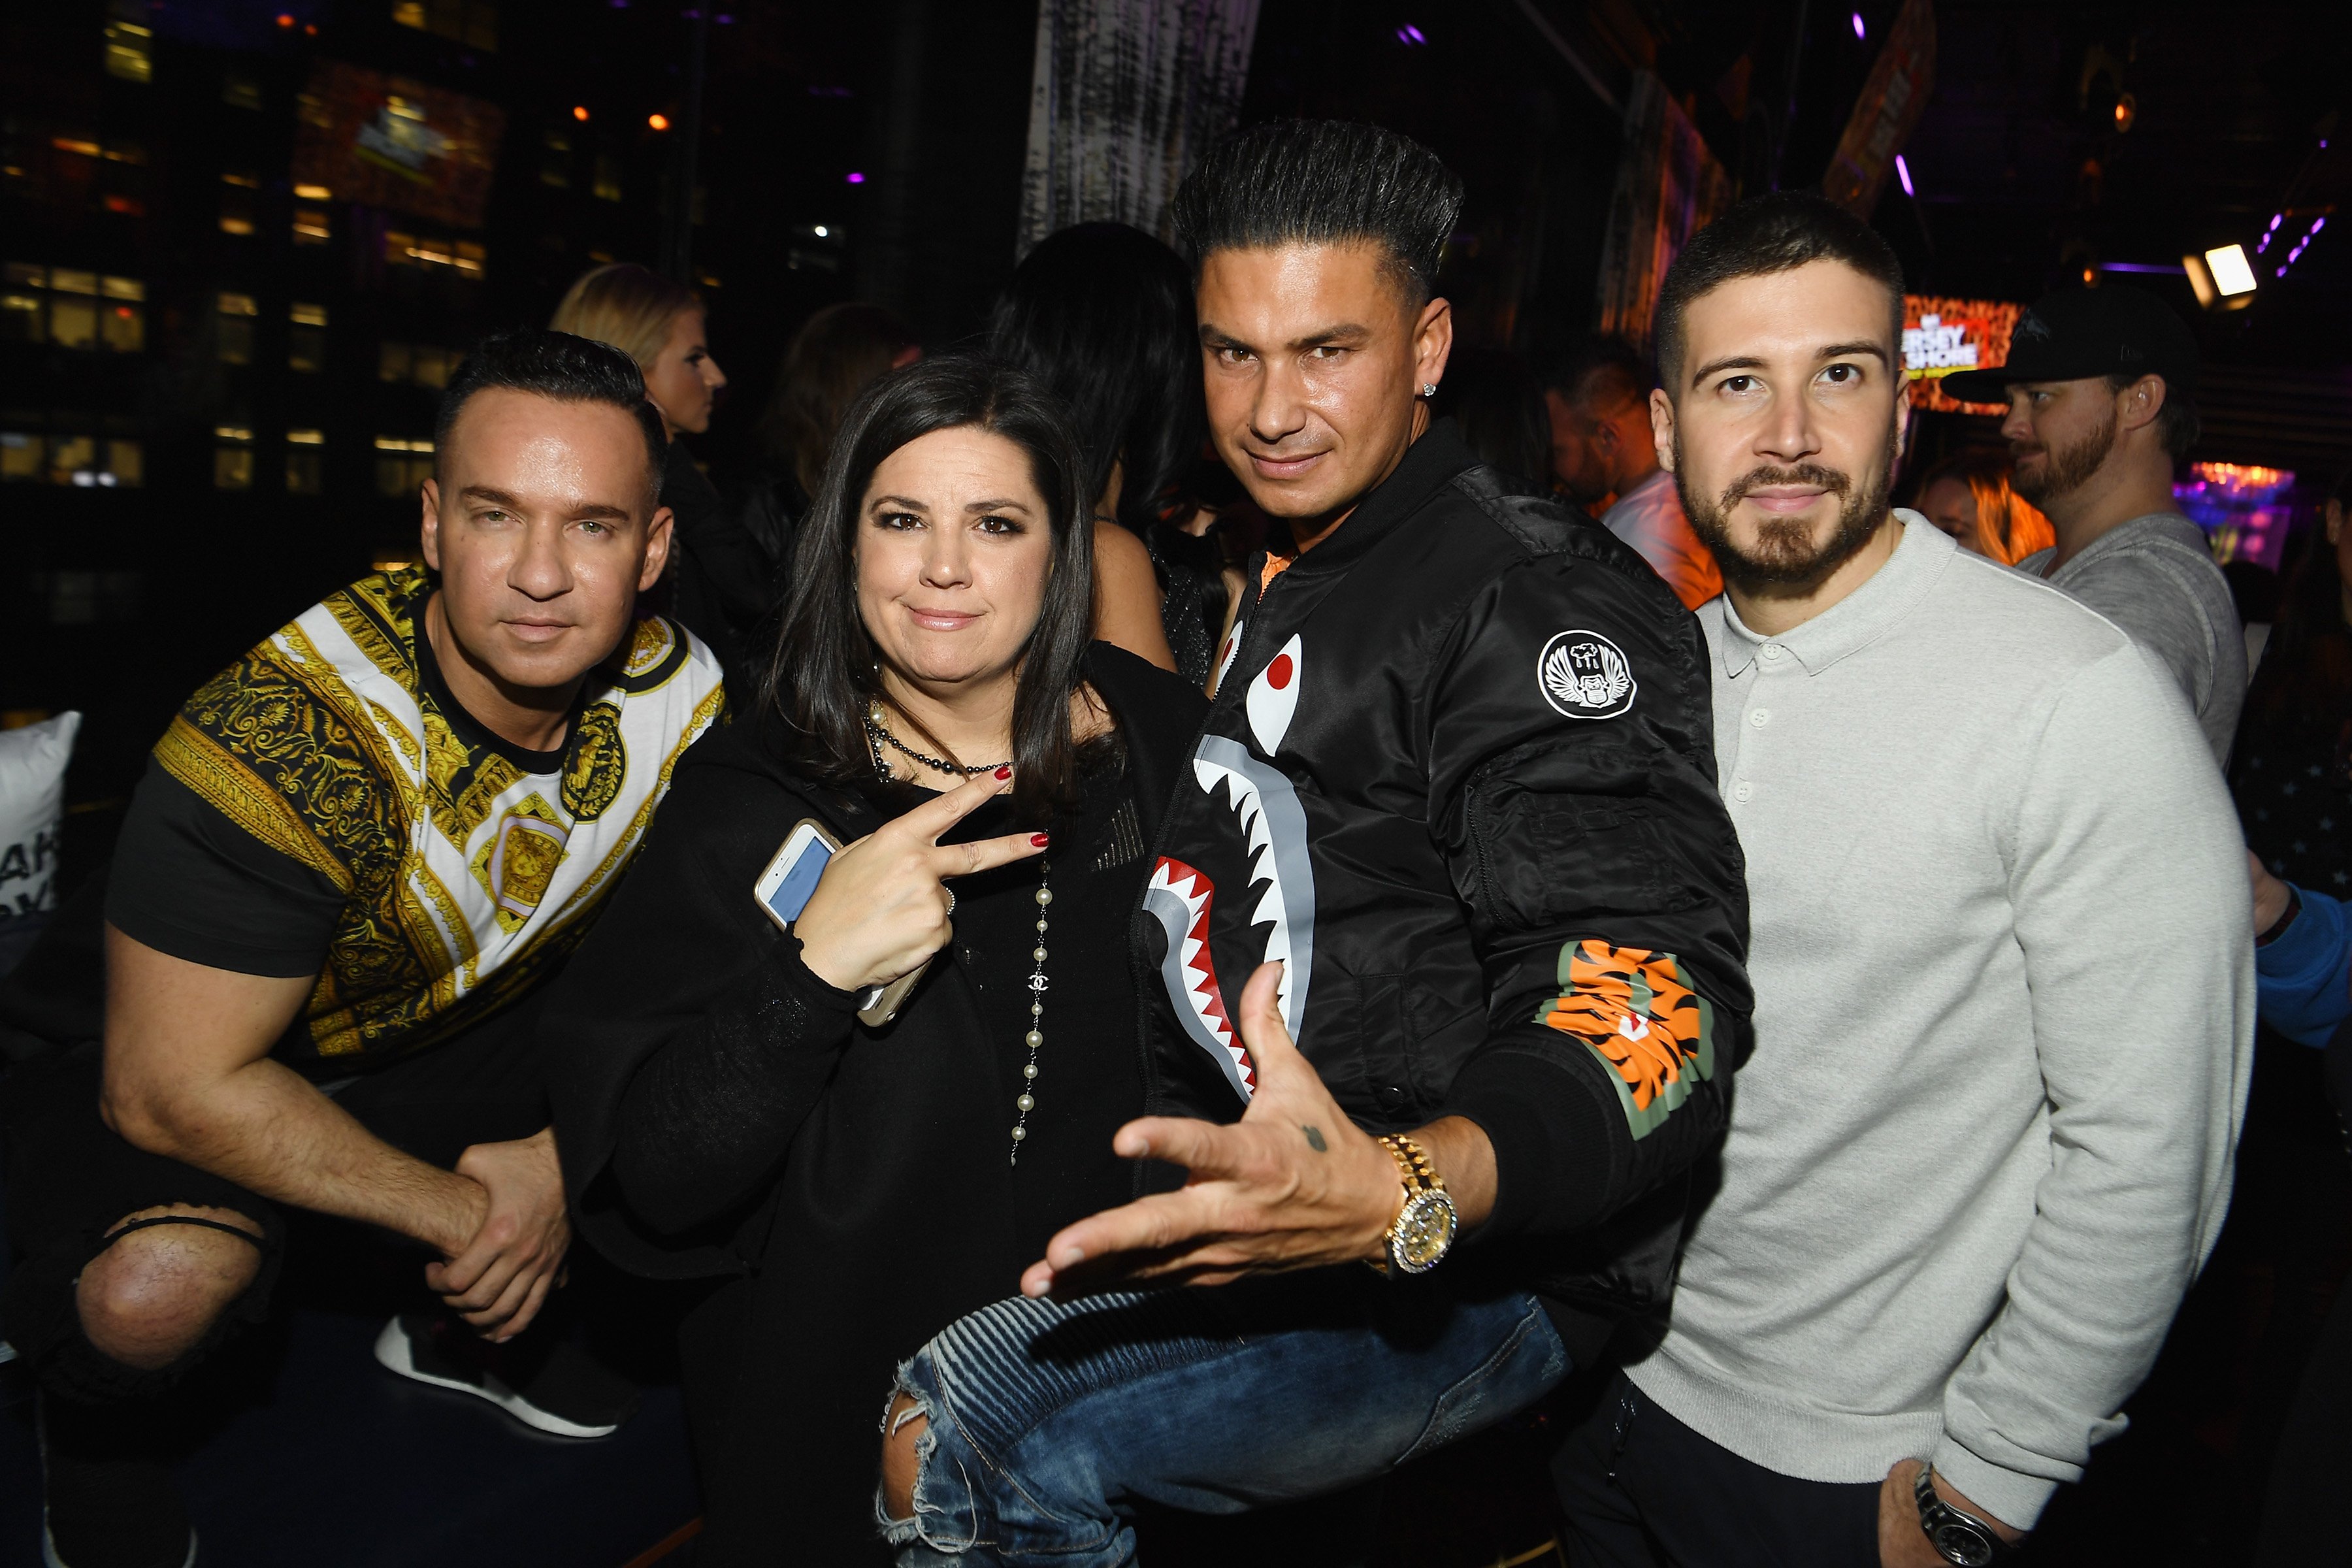 Mike 'The Situation' Sorrentino, SallyAnn Salsano, who came up with the 'Jersey Shore' phrase 'GTL,' Pauly DelVecchio, and Vinny Guadagnino